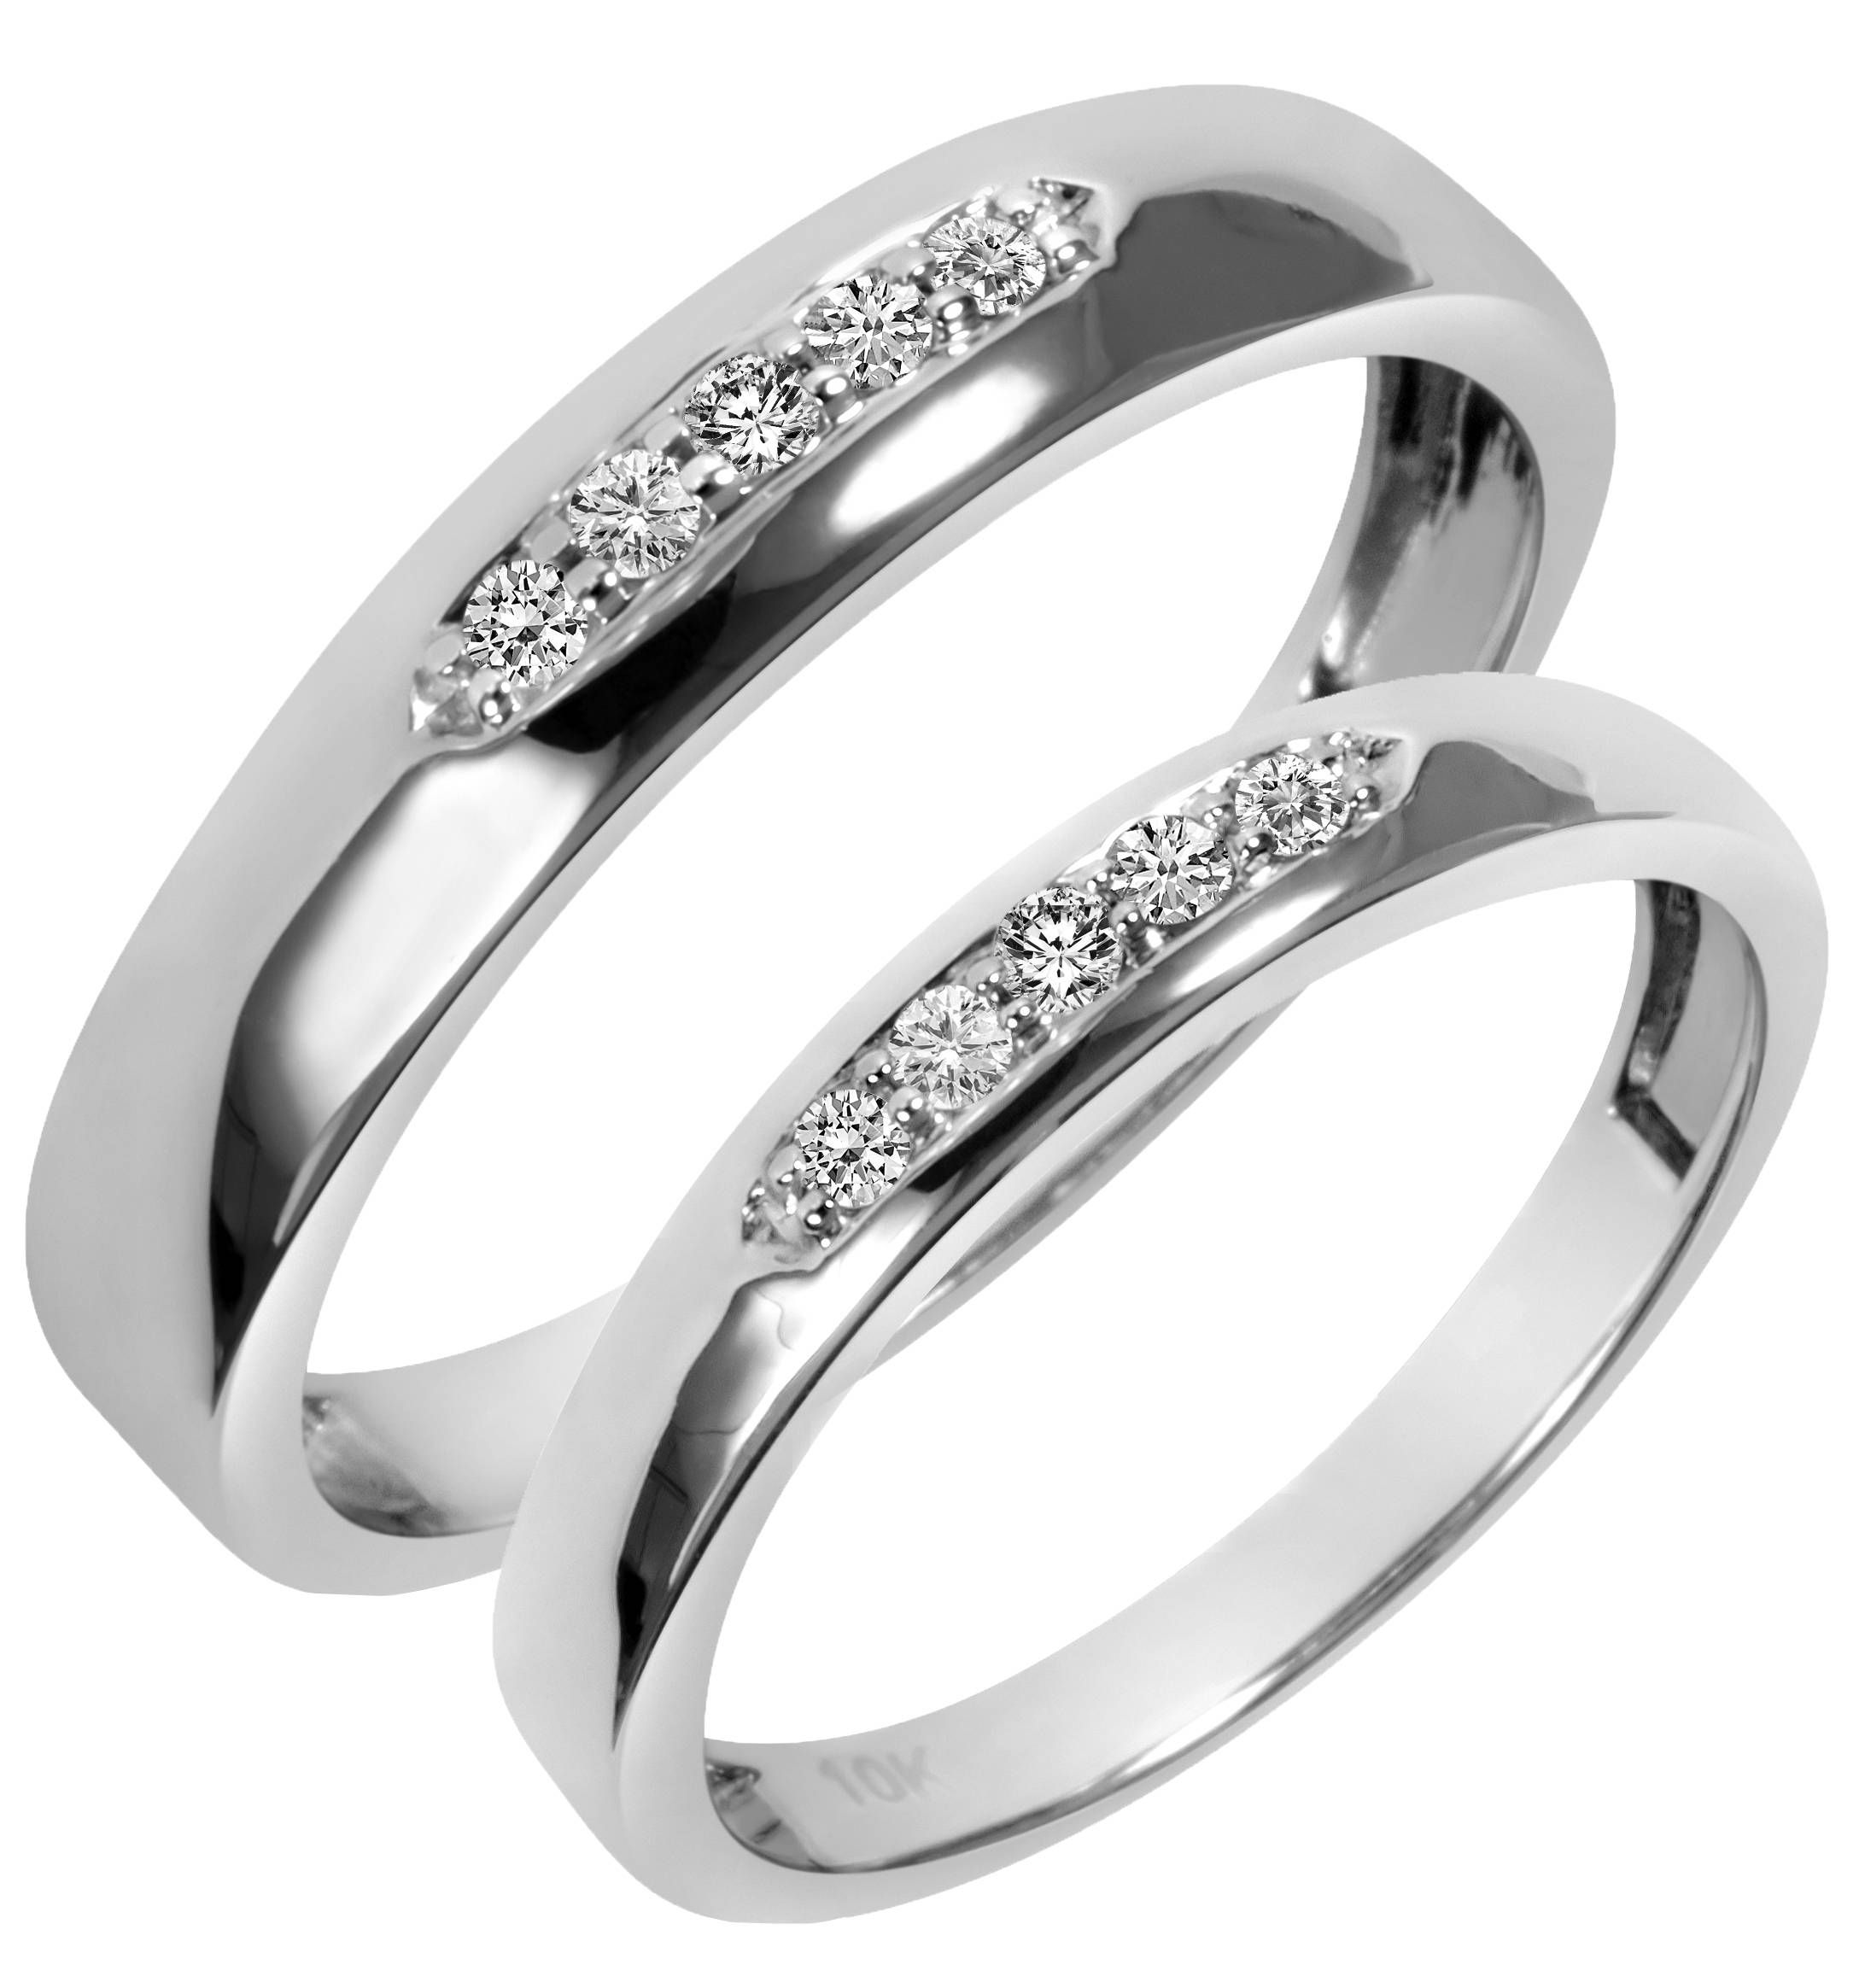 Featured Photo of Wedding Bands Sets His And Hers